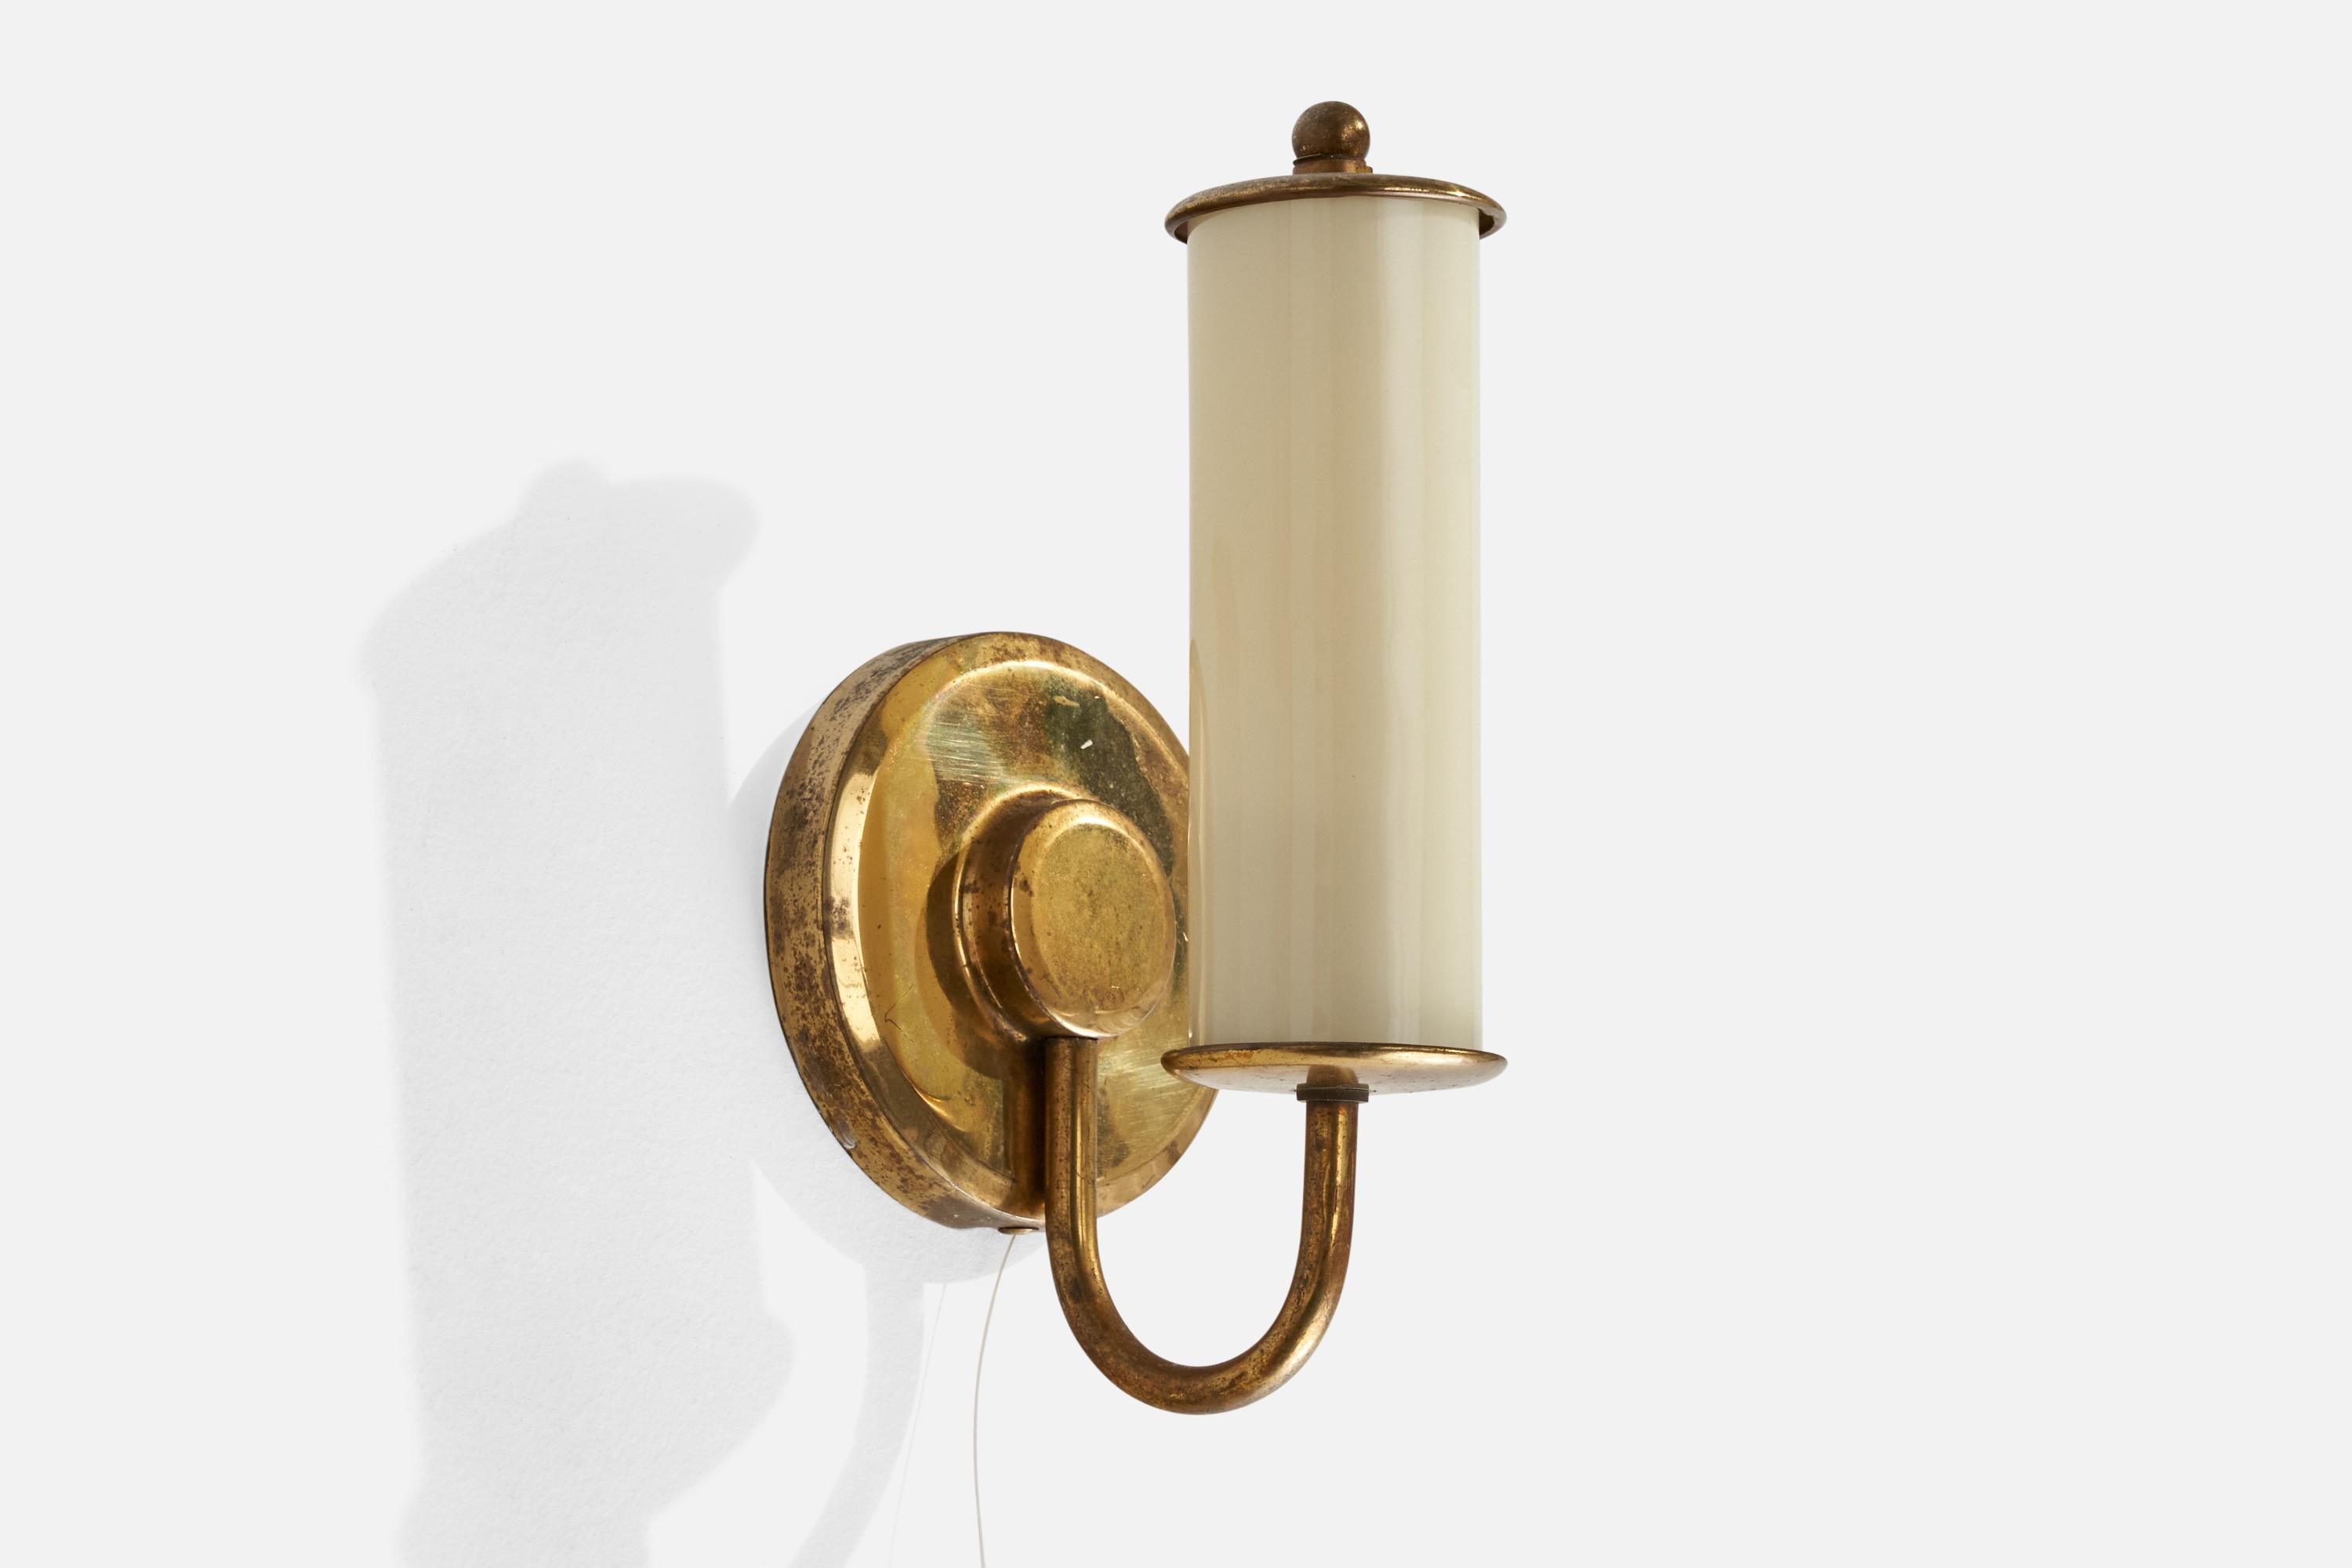 A brass and beige opaline glass wall light designed and produced in Austria, 1950s.

Overall Dimensions (inches): 9.5” H x 3.62” W x 5” D
Back Plate Dimensions (inches): 3.62” H x 0.60” D
Bulb Specifications: E-14 Bulb
Number of Sockets: 1
All